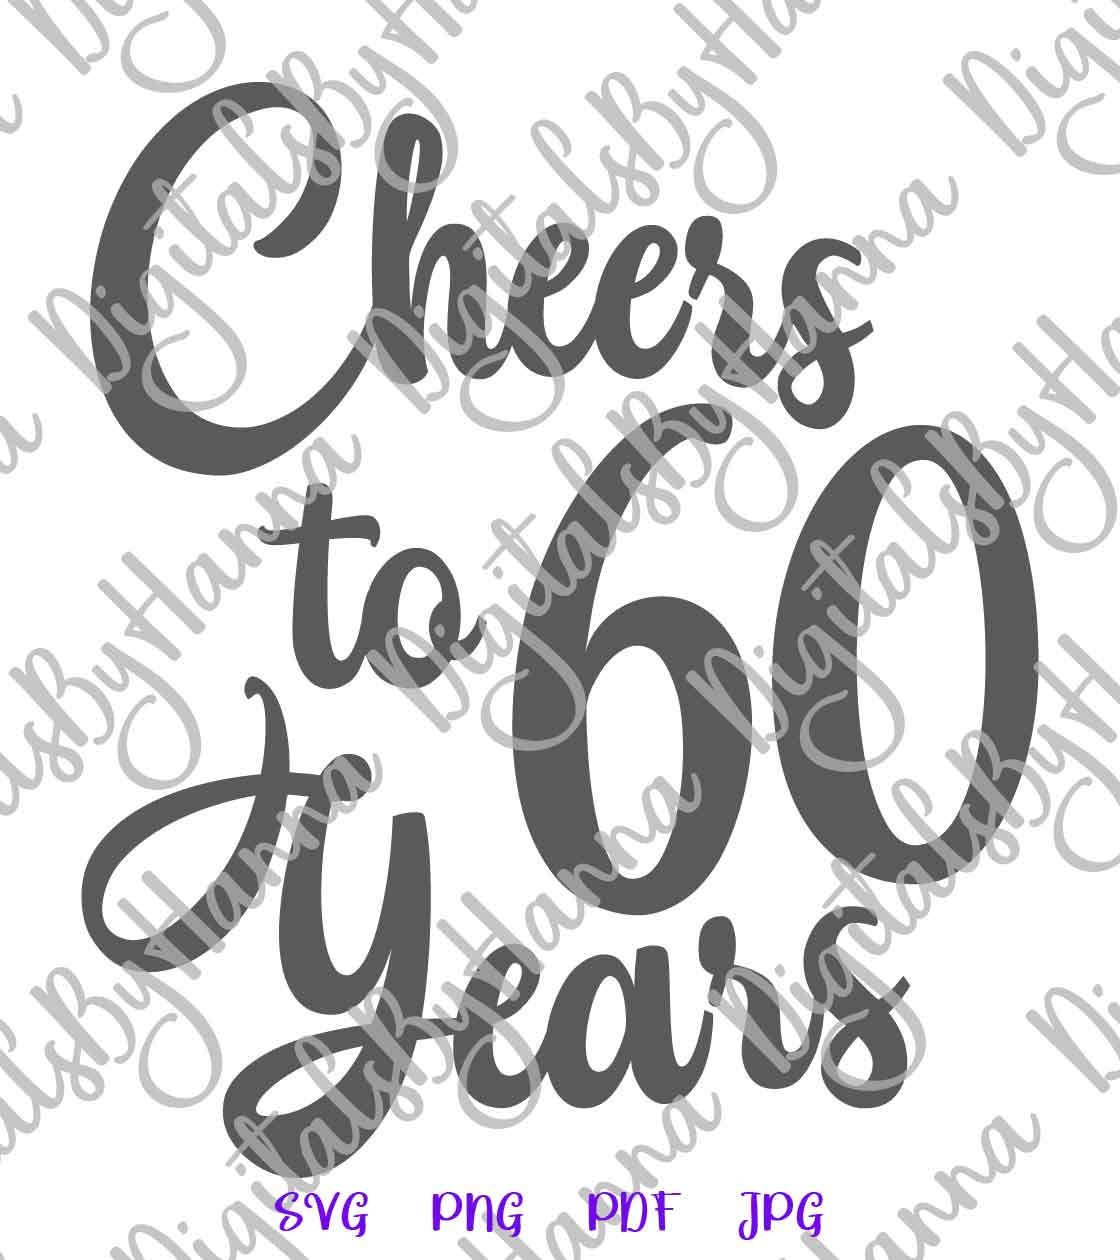 60th Birthday SVG Files for Cricut Saying Cheers to 60 Years | Etsy